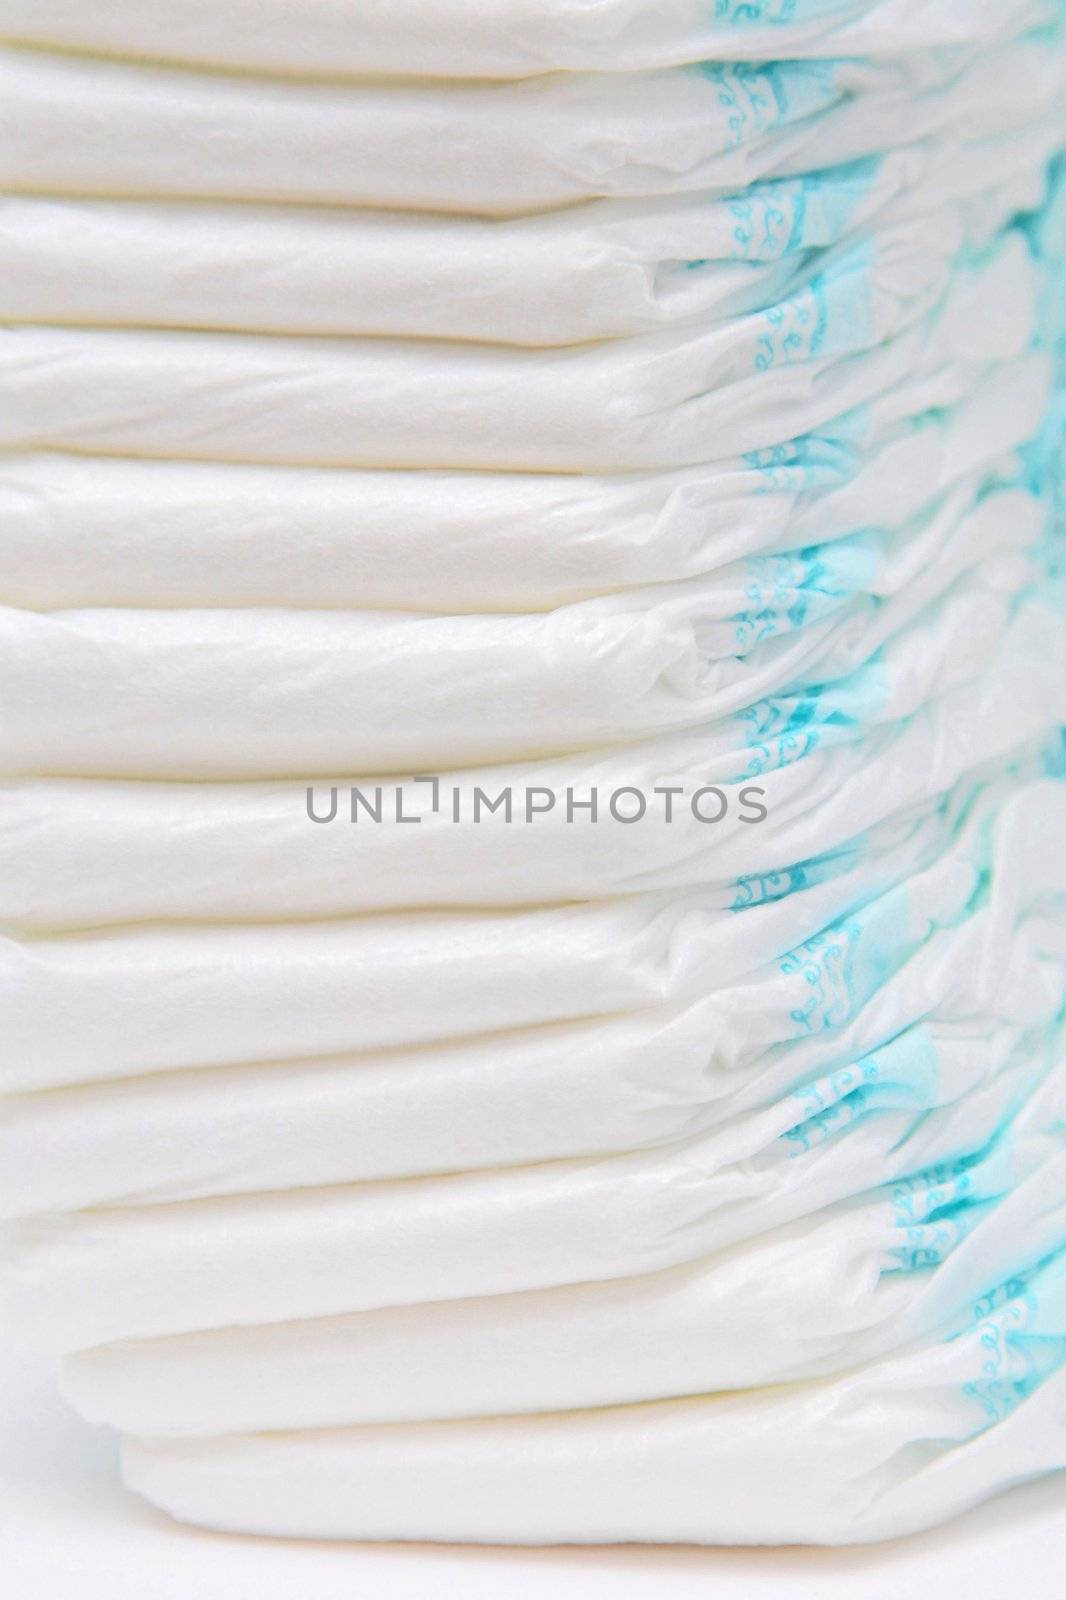 An abstract image of nappies